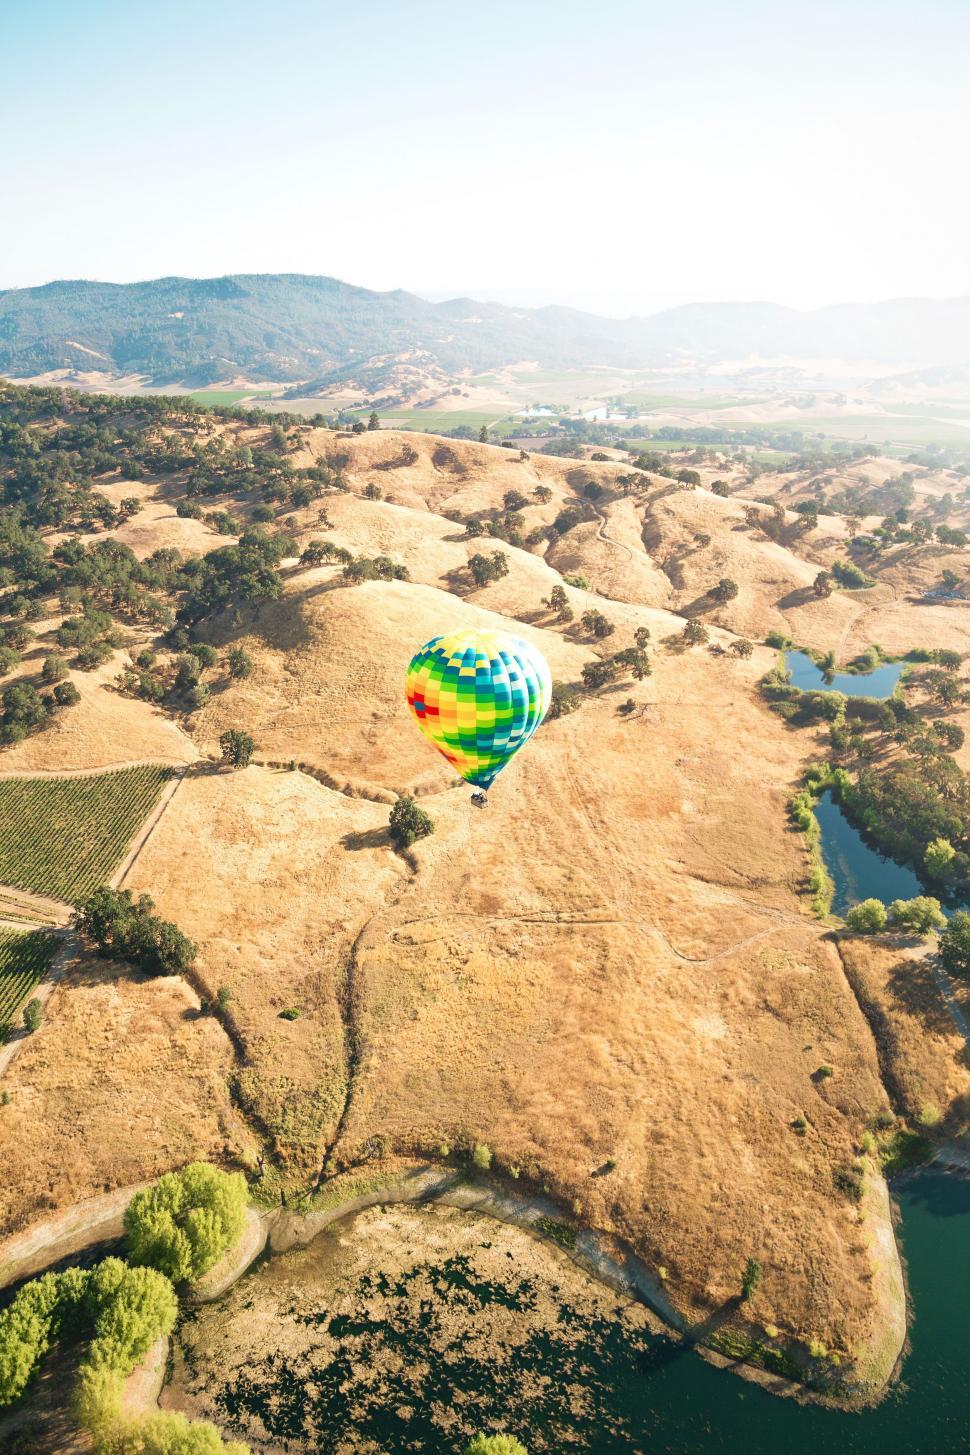 Free Image of Hot Air Balloon over hill 